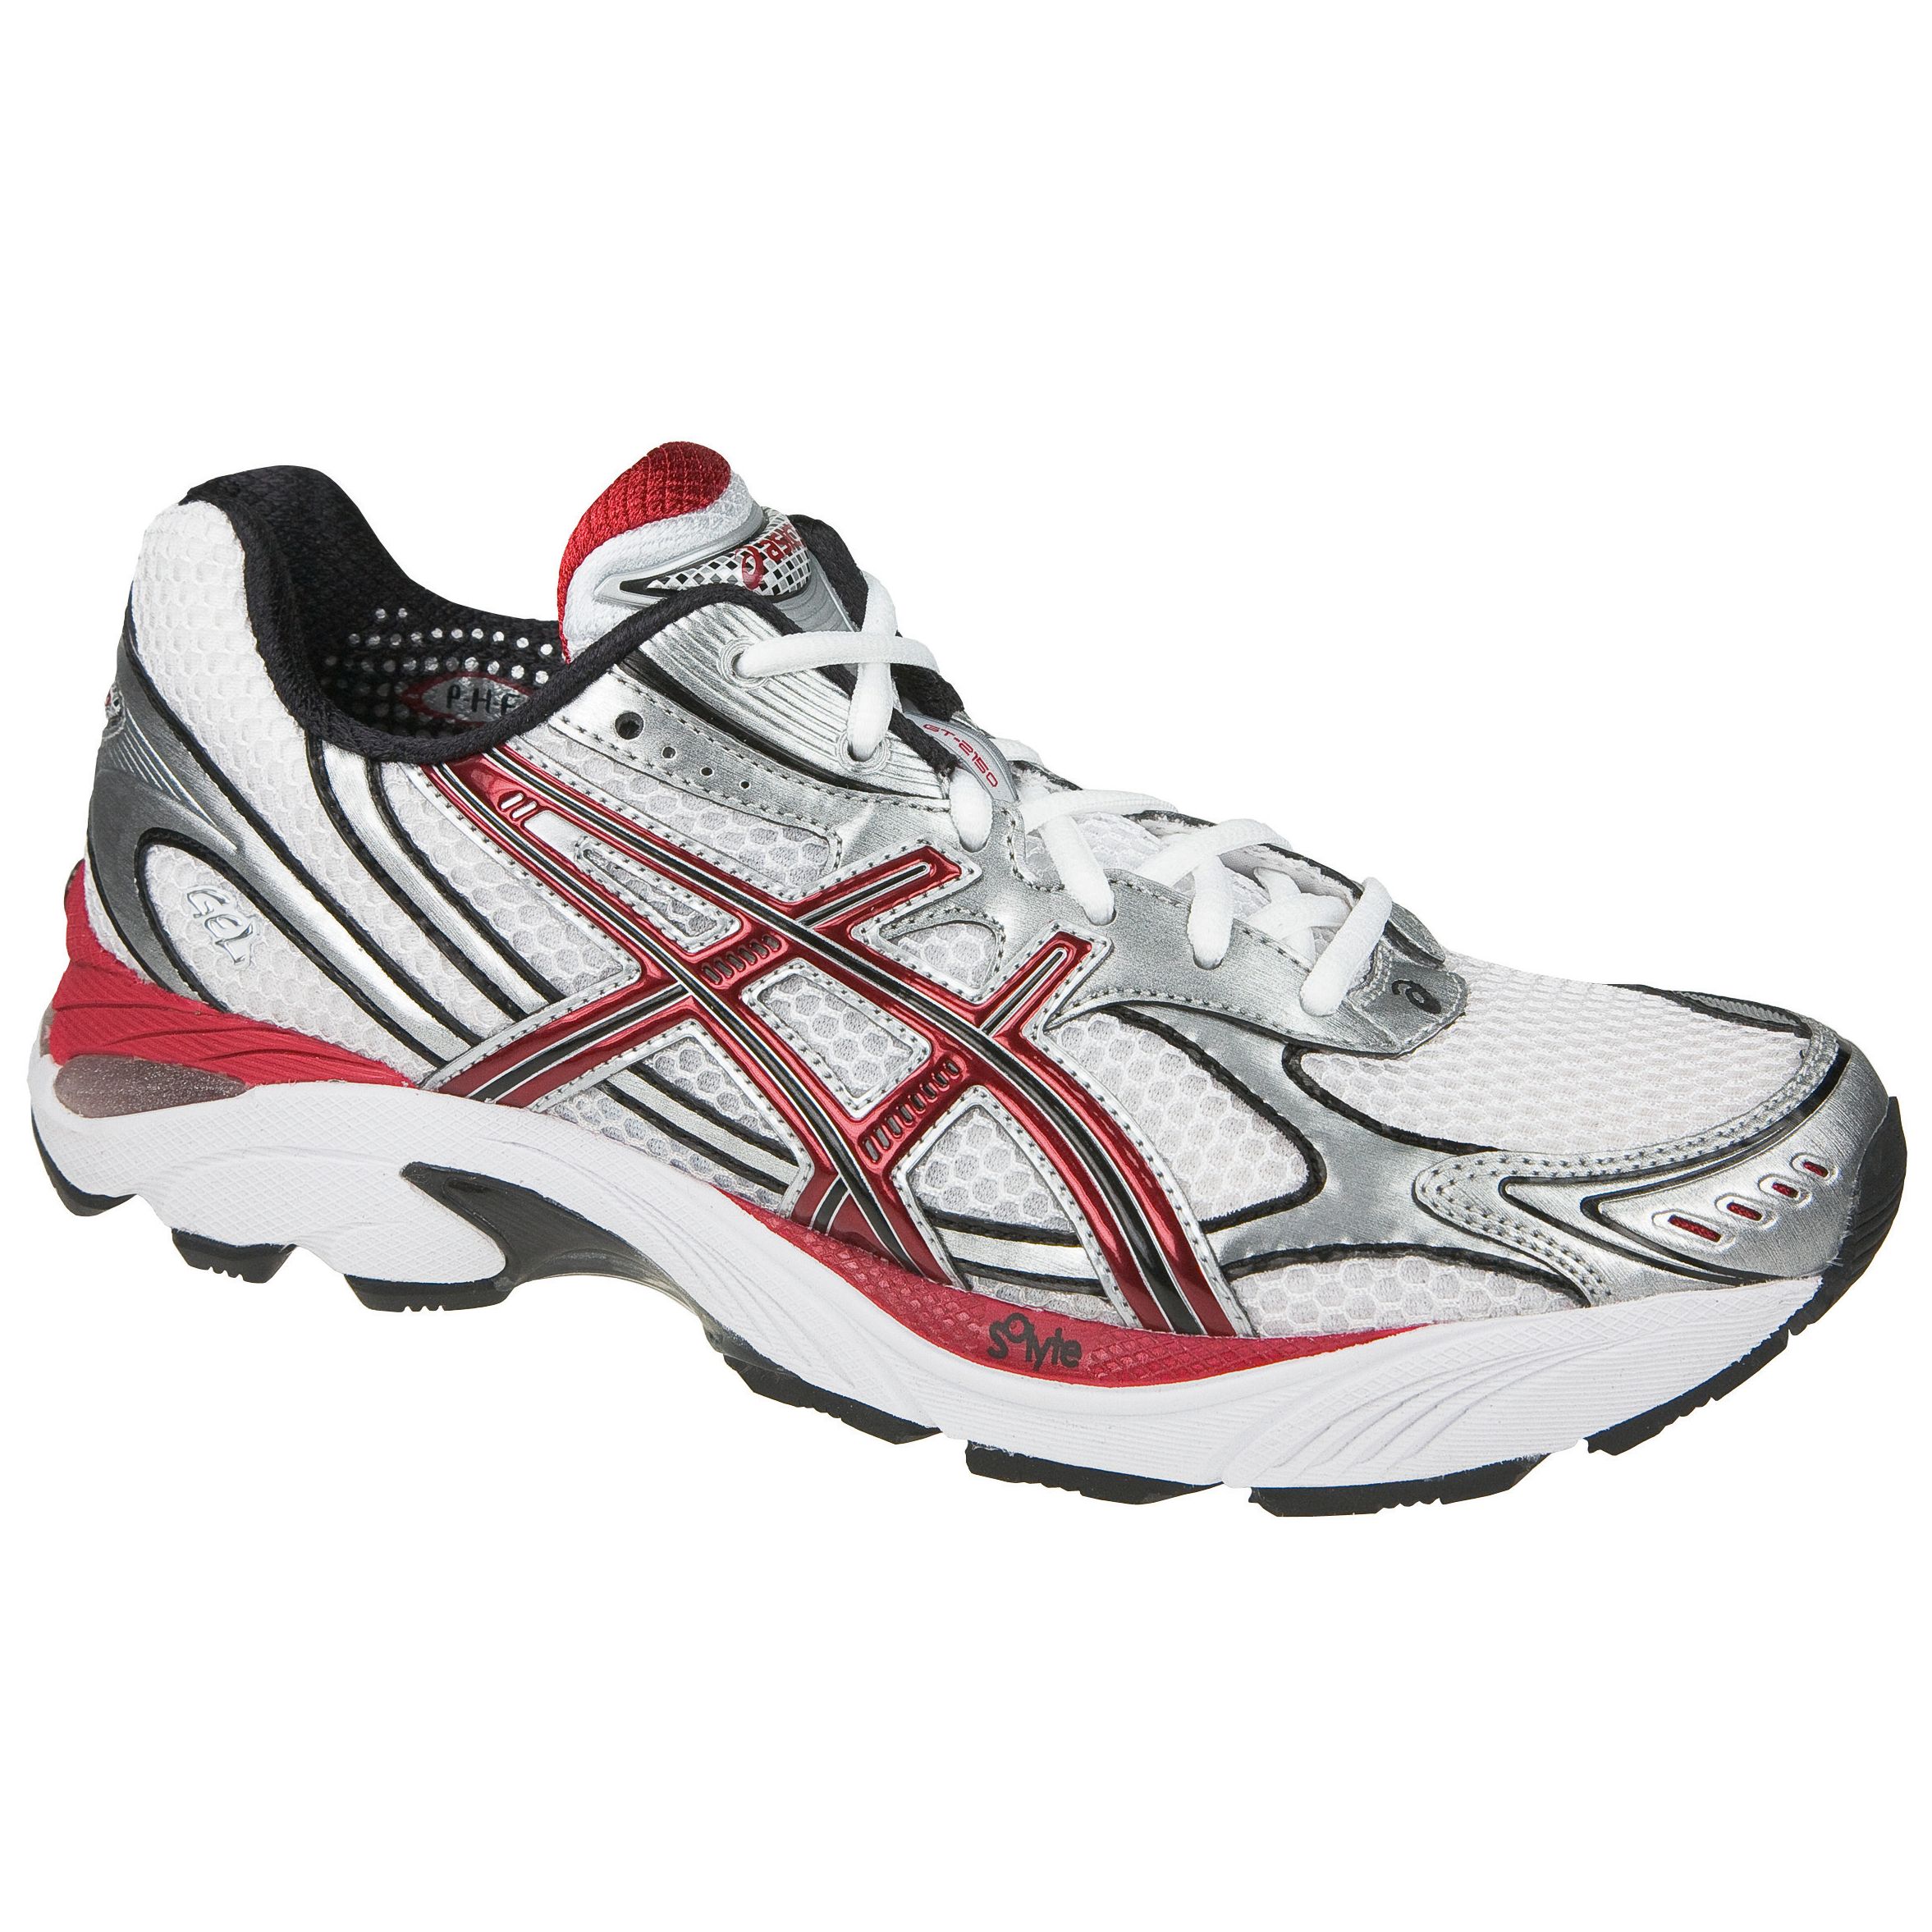 Asics GT2150 Running Shoes, White/red, 10